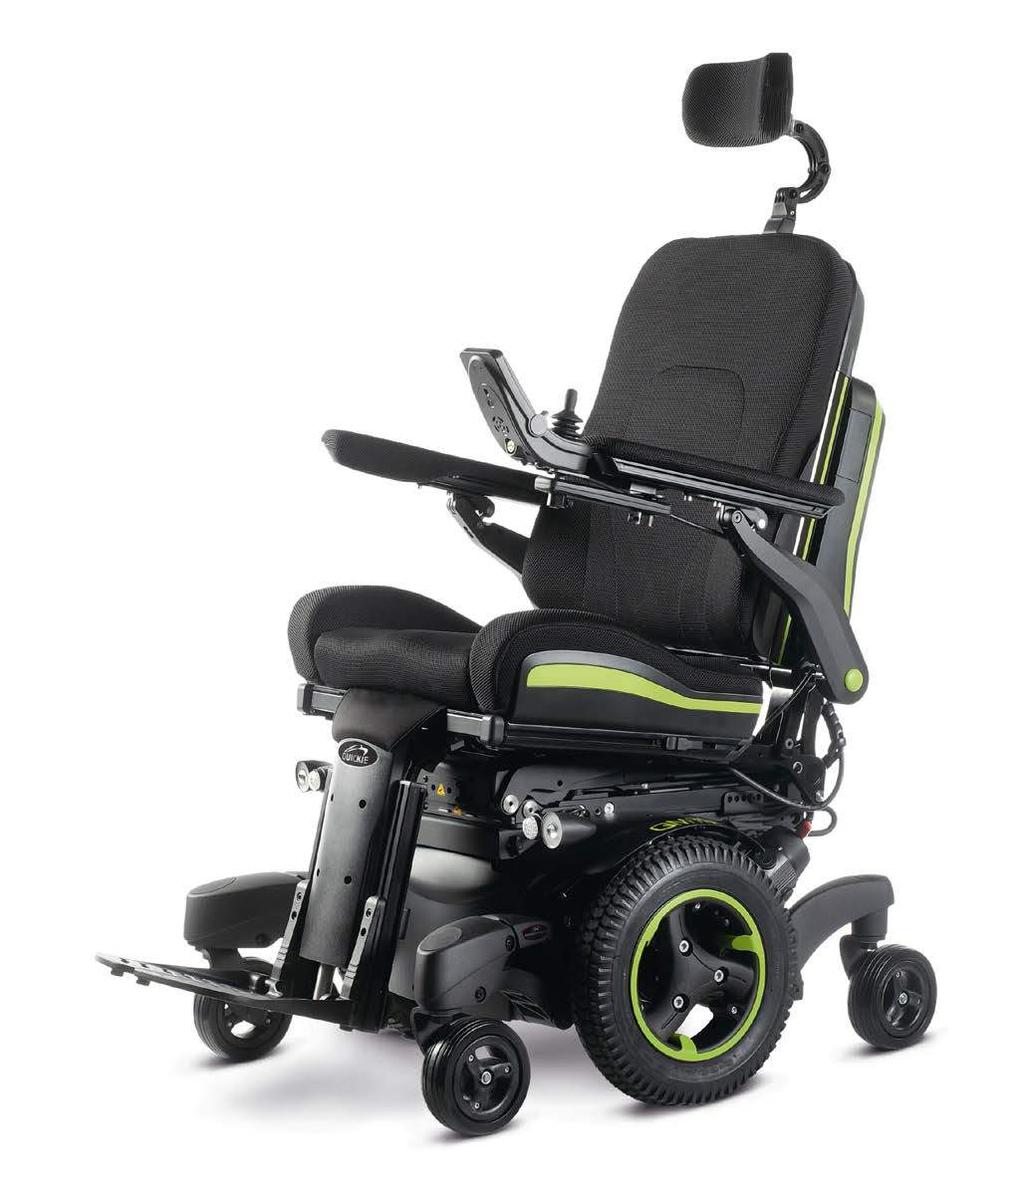 QM-710 SEDEO ERGO The QM-710 Sedeo Ergo featuring Spidertrac 2.0 suspension, redefines powered wheelchair technology, inside and out.